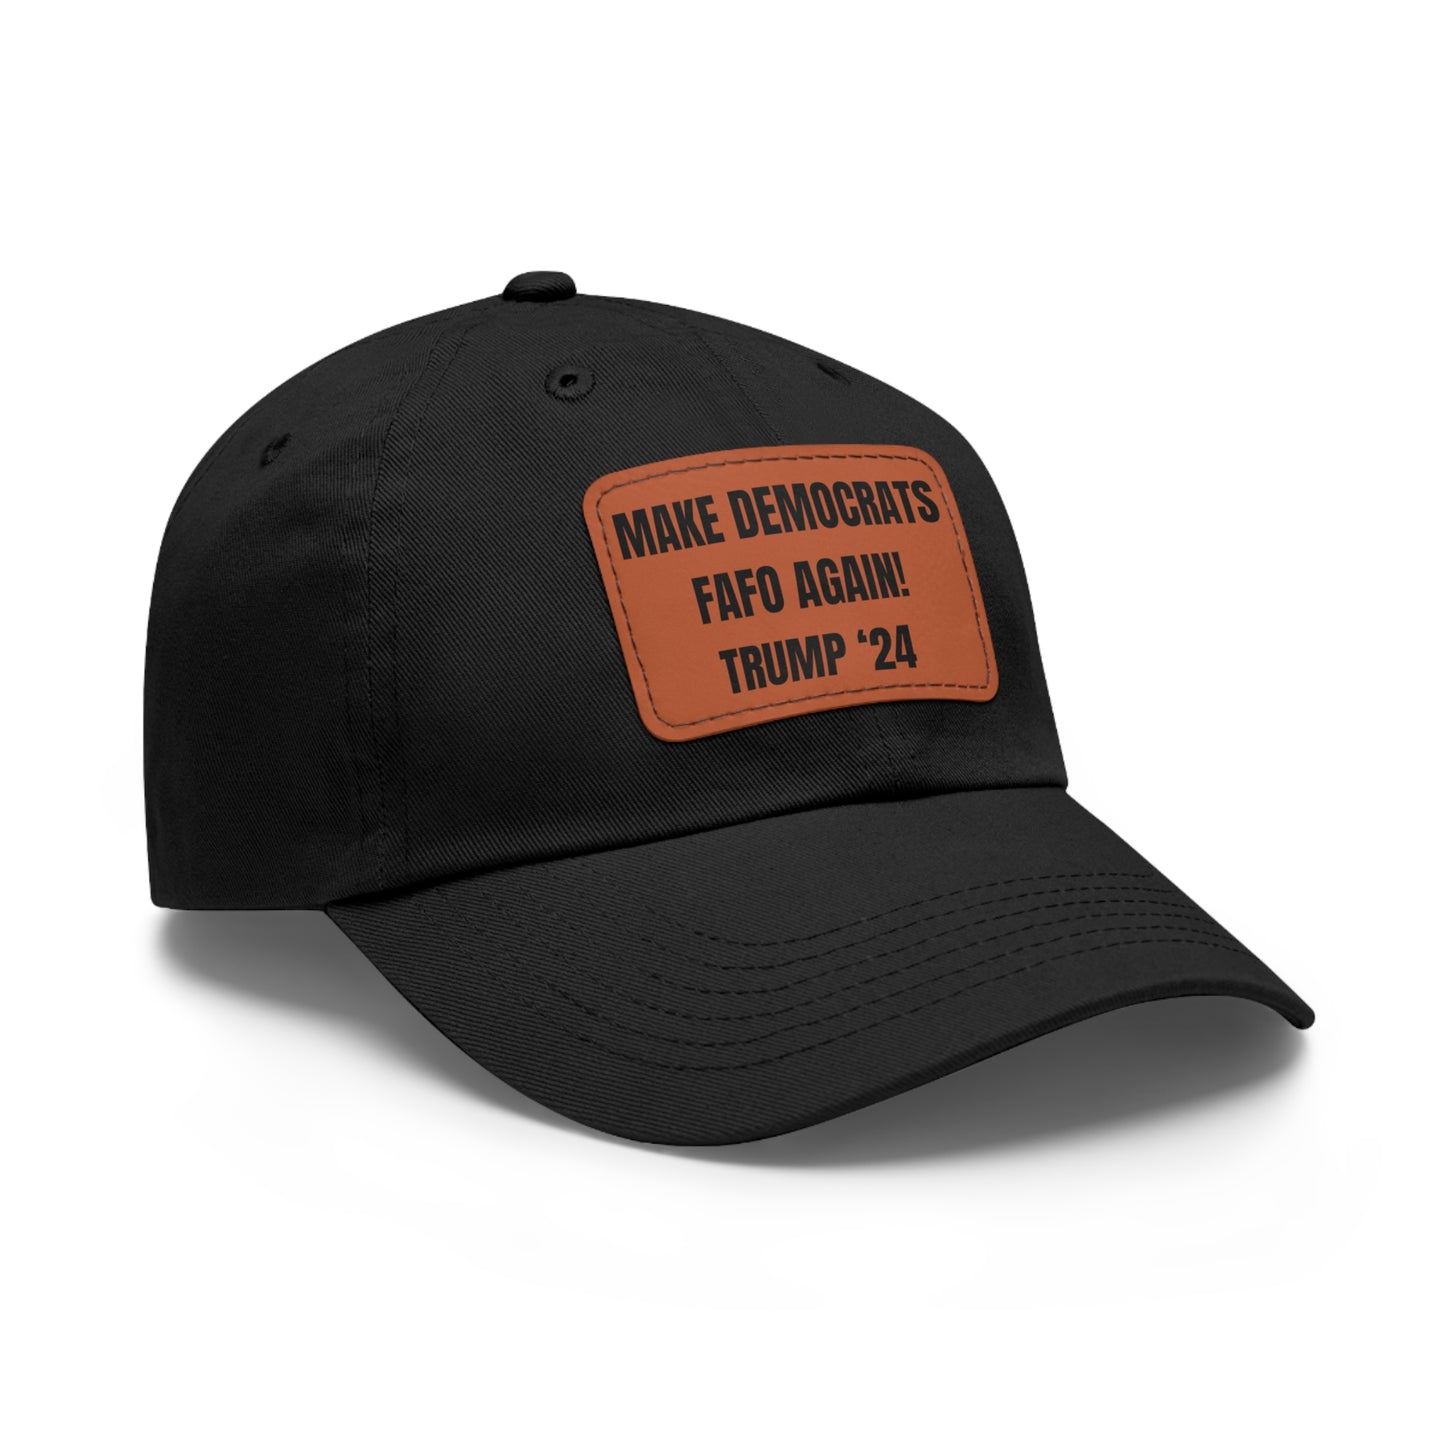 "MAKE DEMOCRATS FAFO AGAIN! TRUMP '24" Leather Patch Hat